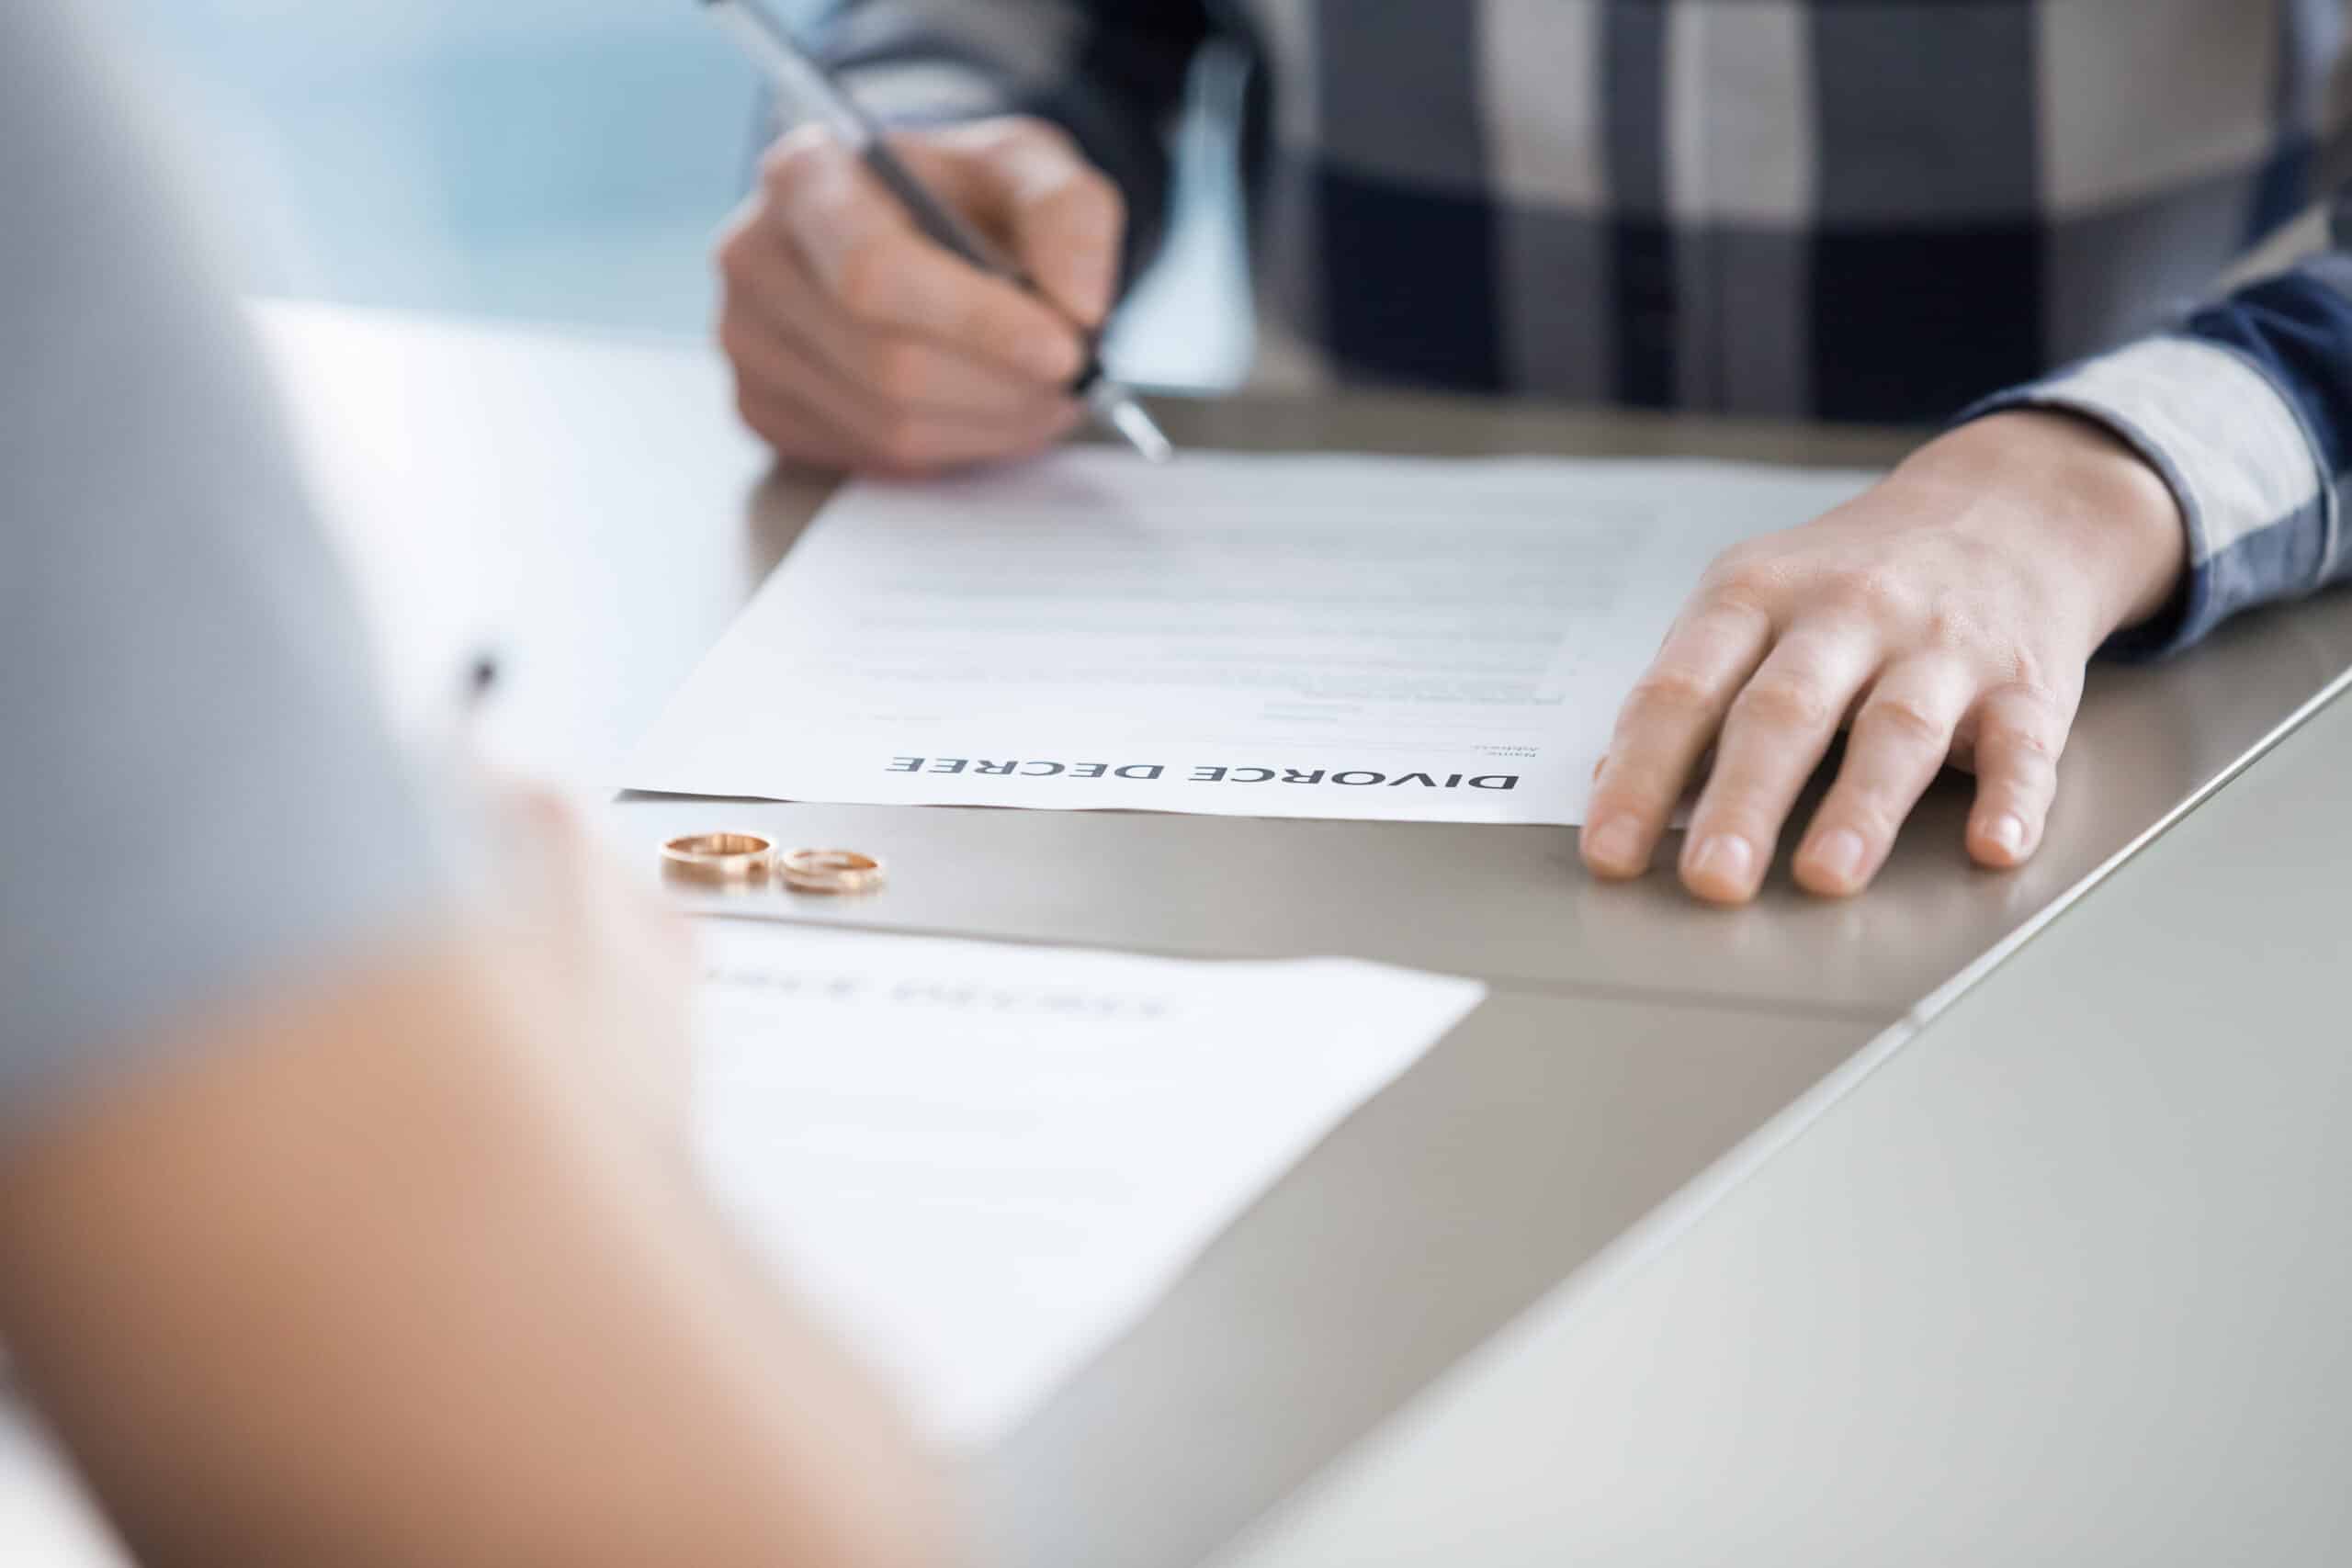 Can You Get A Divorce Without Your Spouse's Signature?